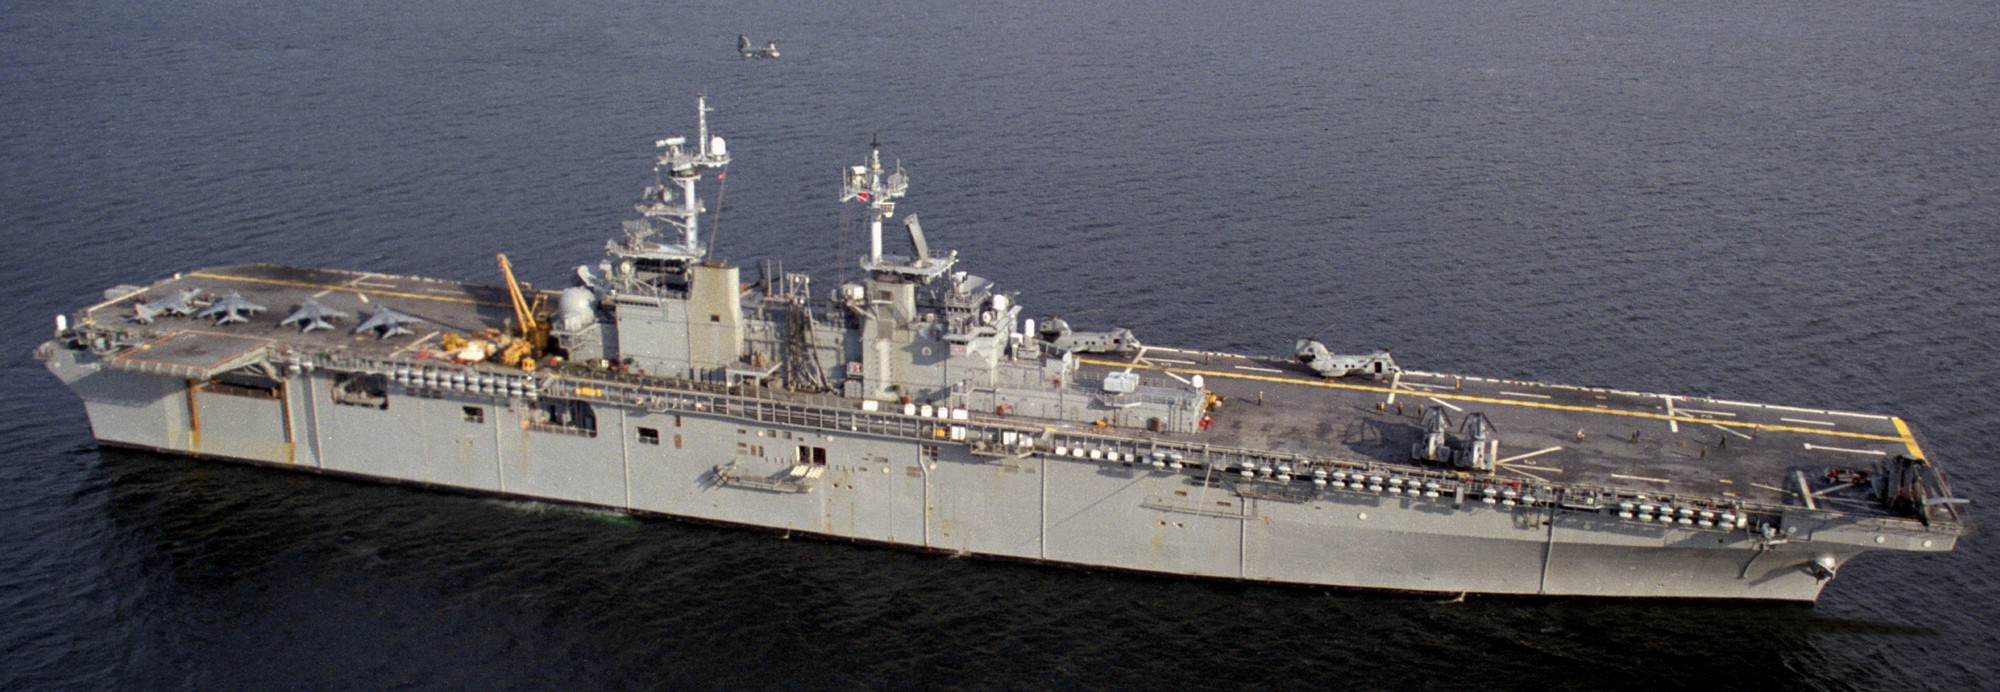 lhd-1 uss wasp amphibious assault landing ship dock helicopter us navy exercise strong resolve norway 95